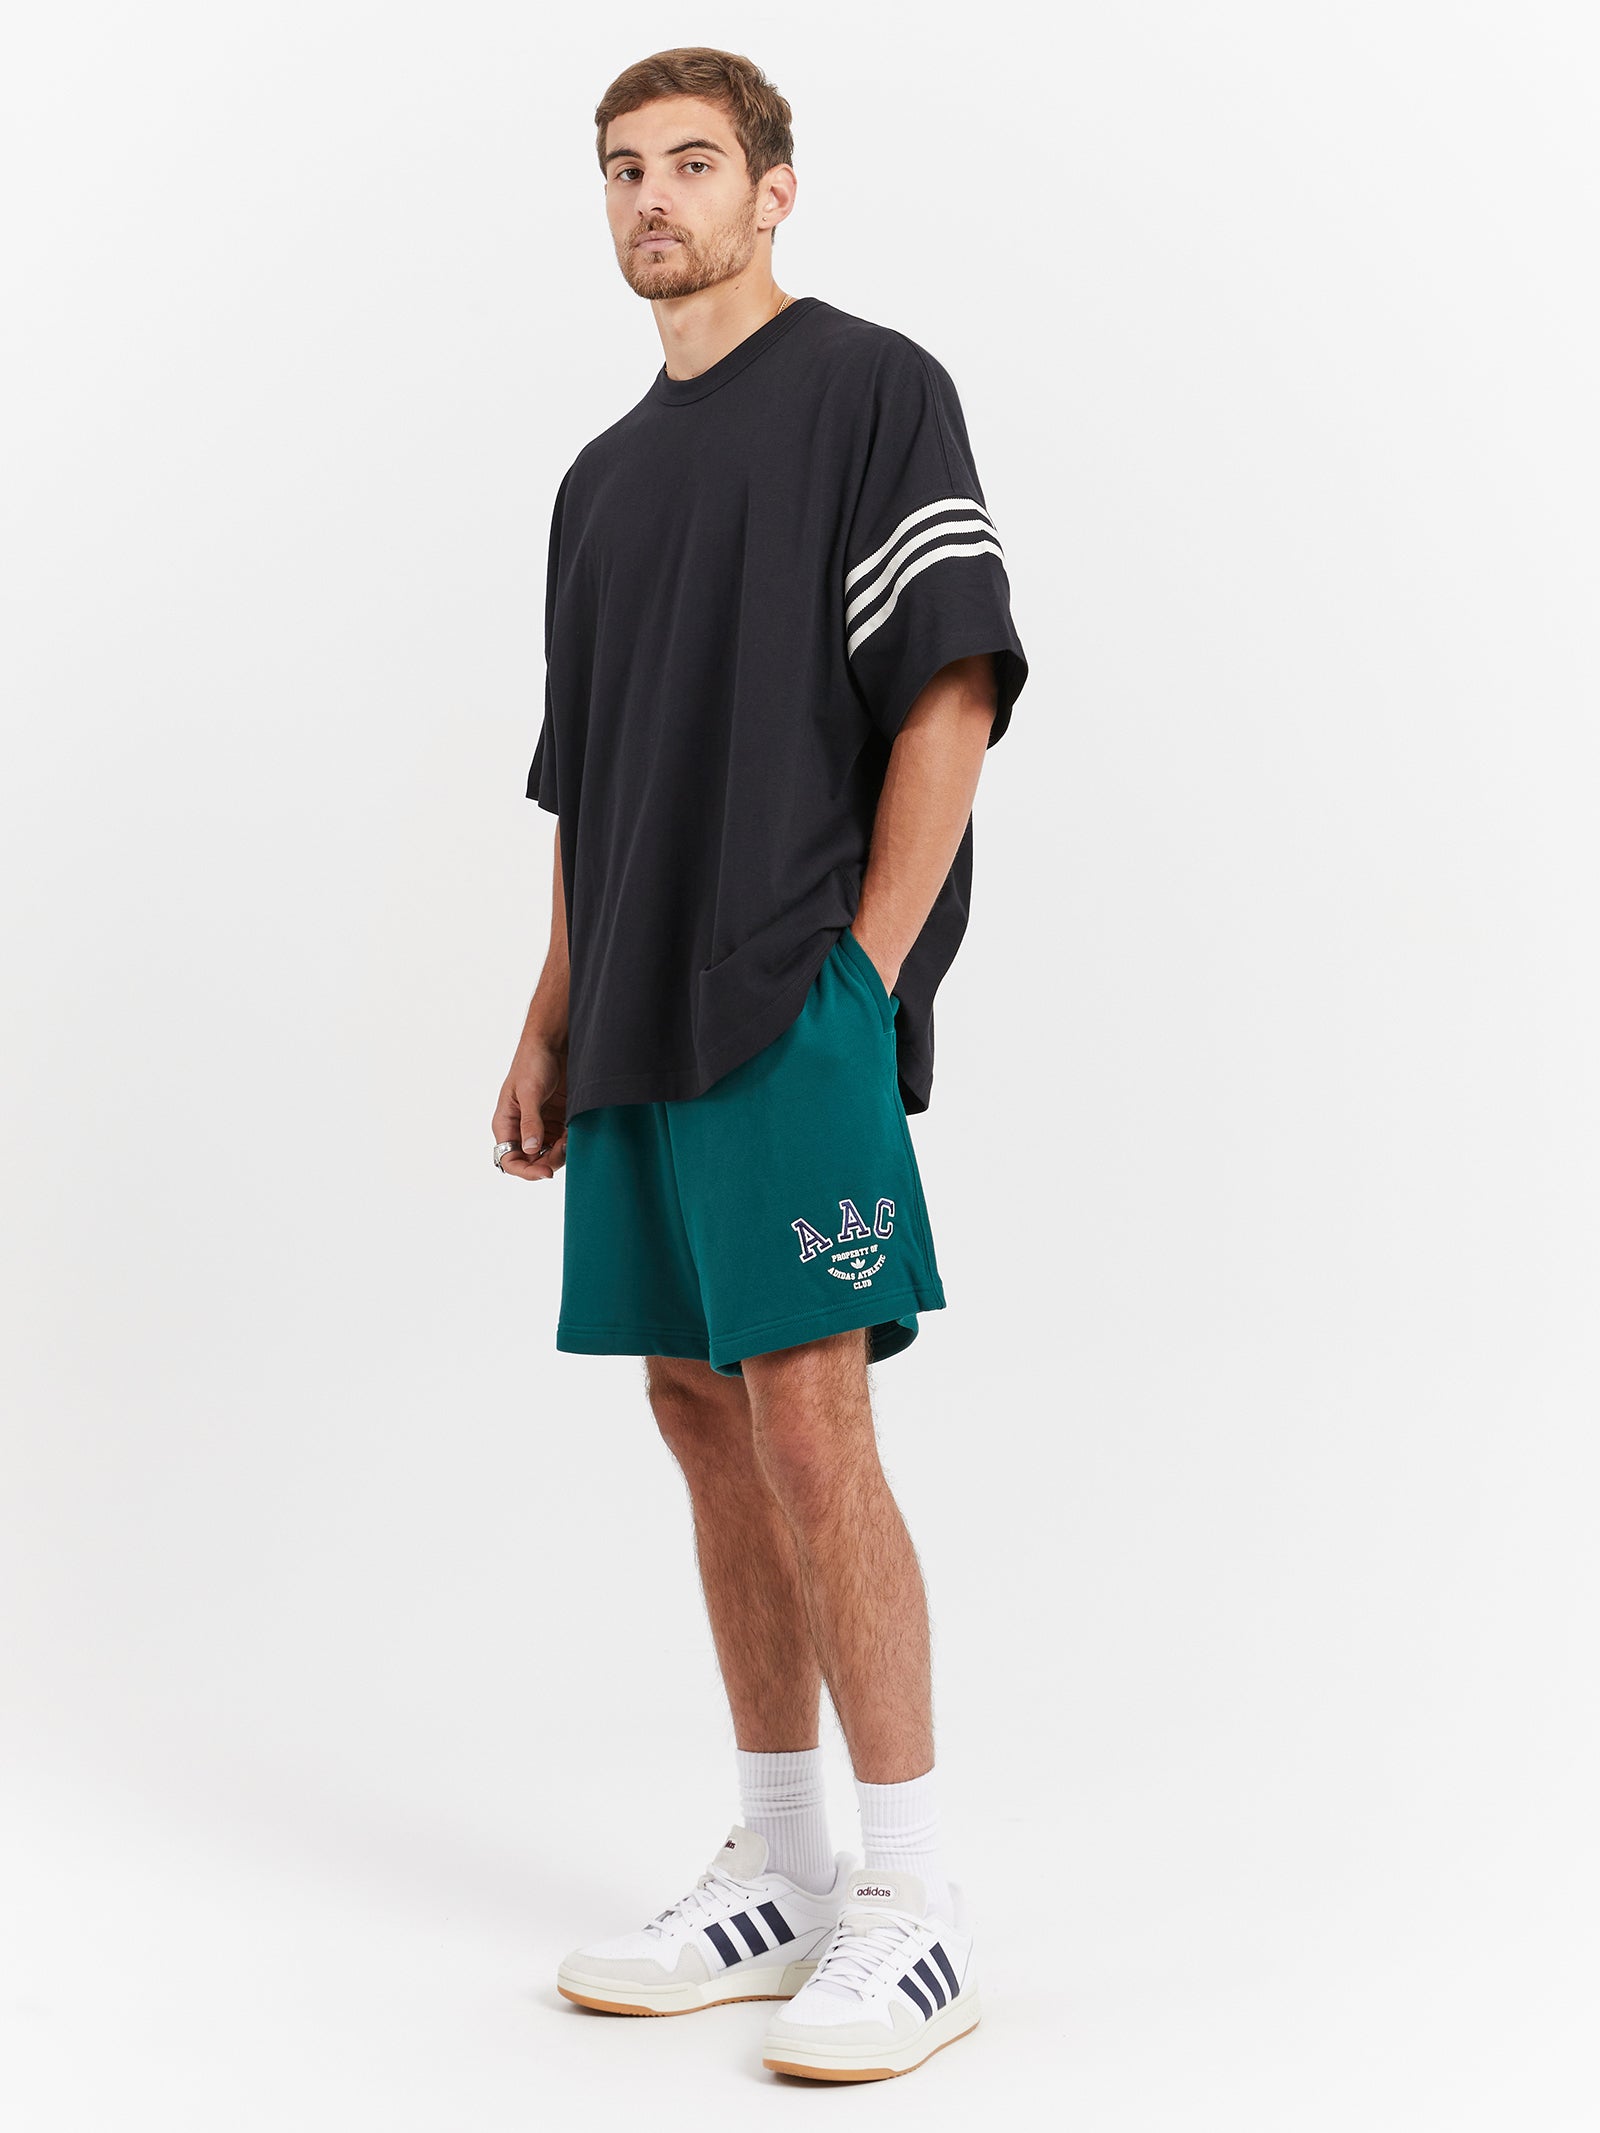 Adidas Originals Clothing, Accessories & Shoes Online | Fast Delivery Page  2 - Glue Store